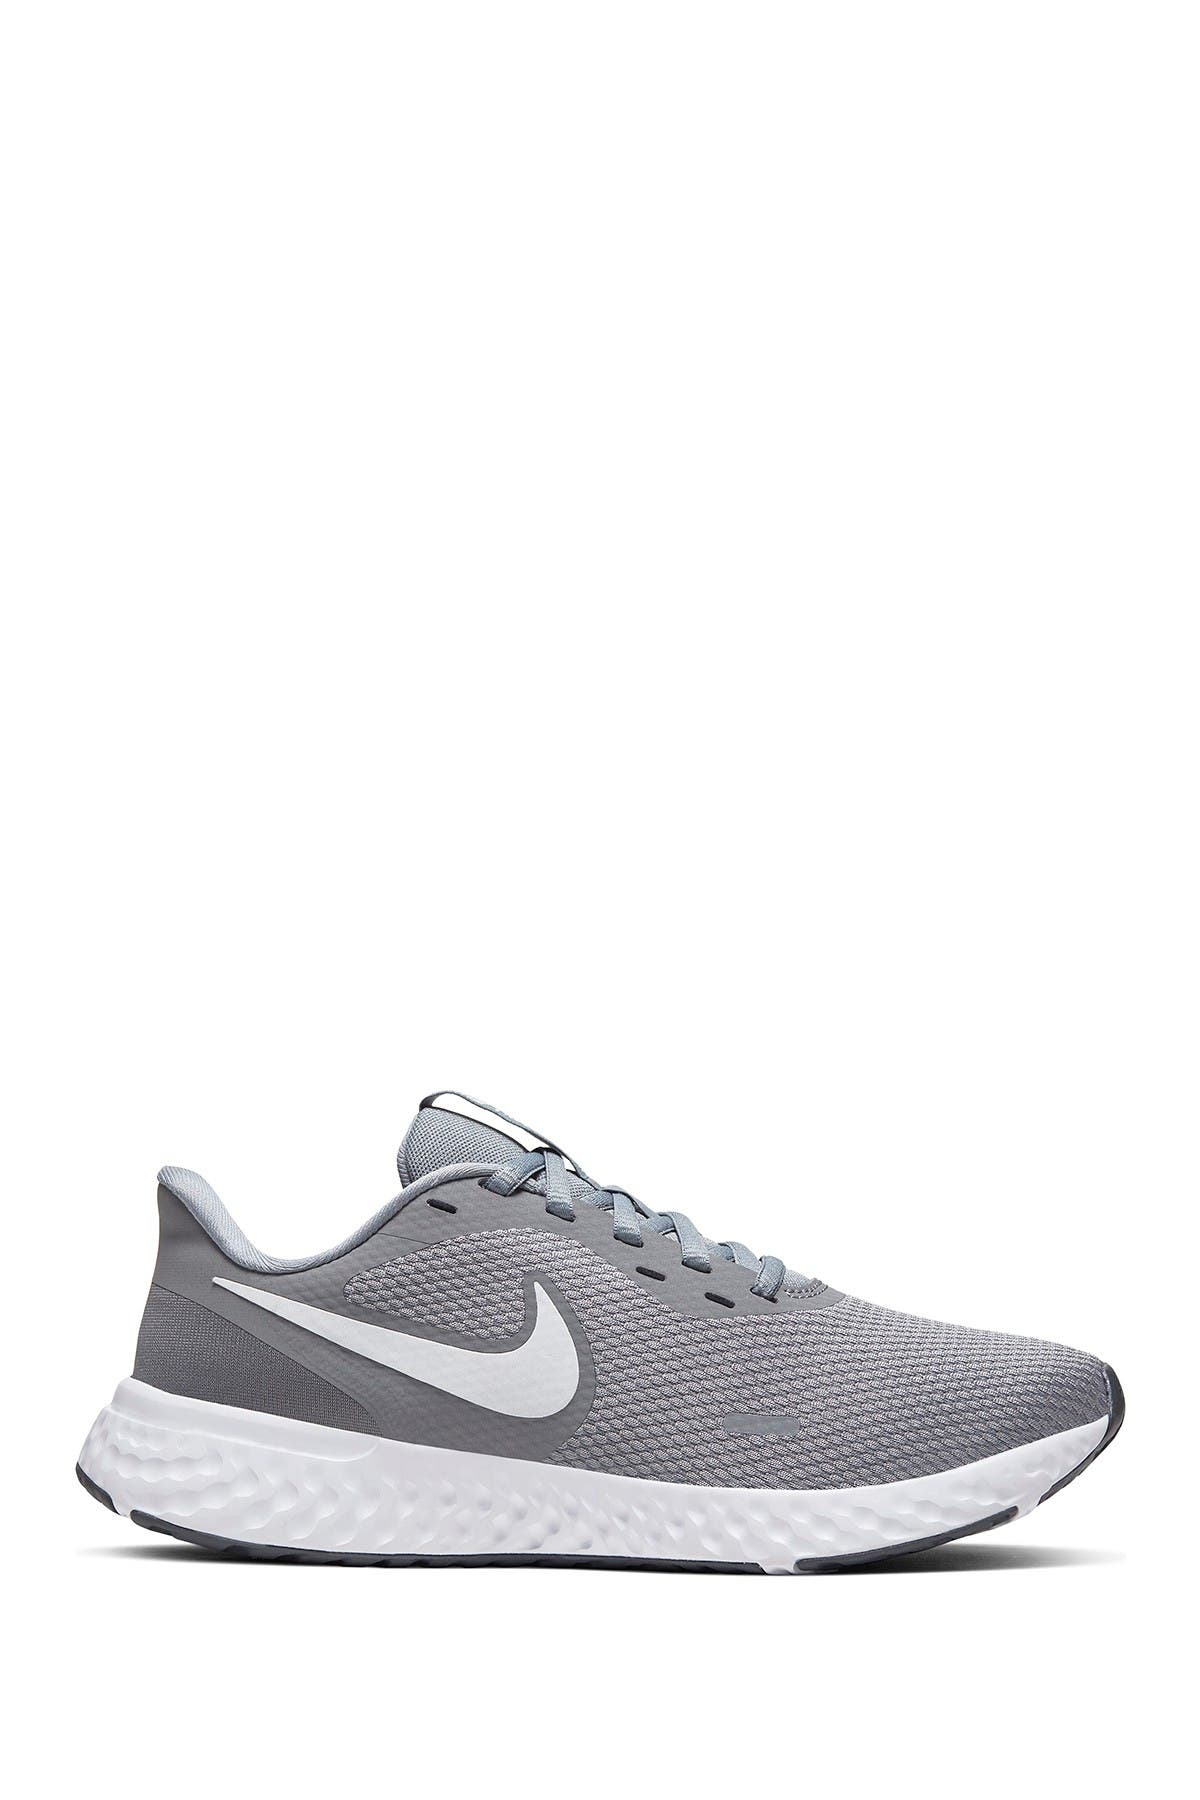 nike grey textile running shoes